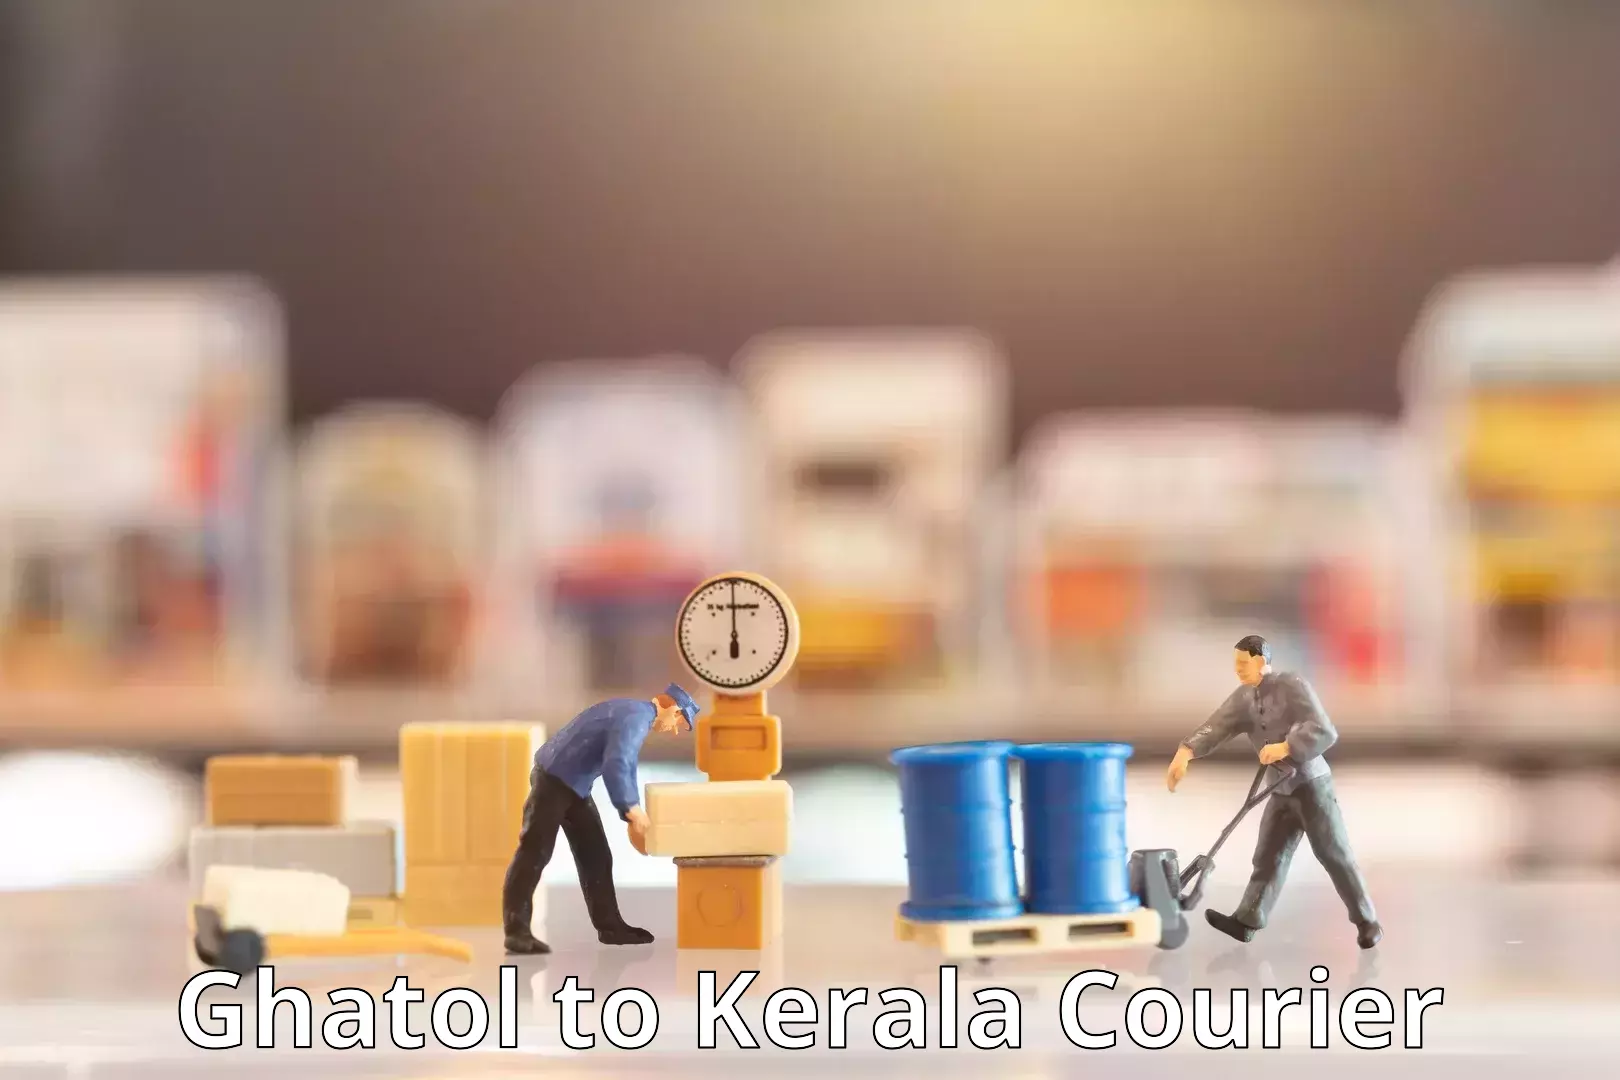 Customer-oriented courier services Ghatol to Kollam